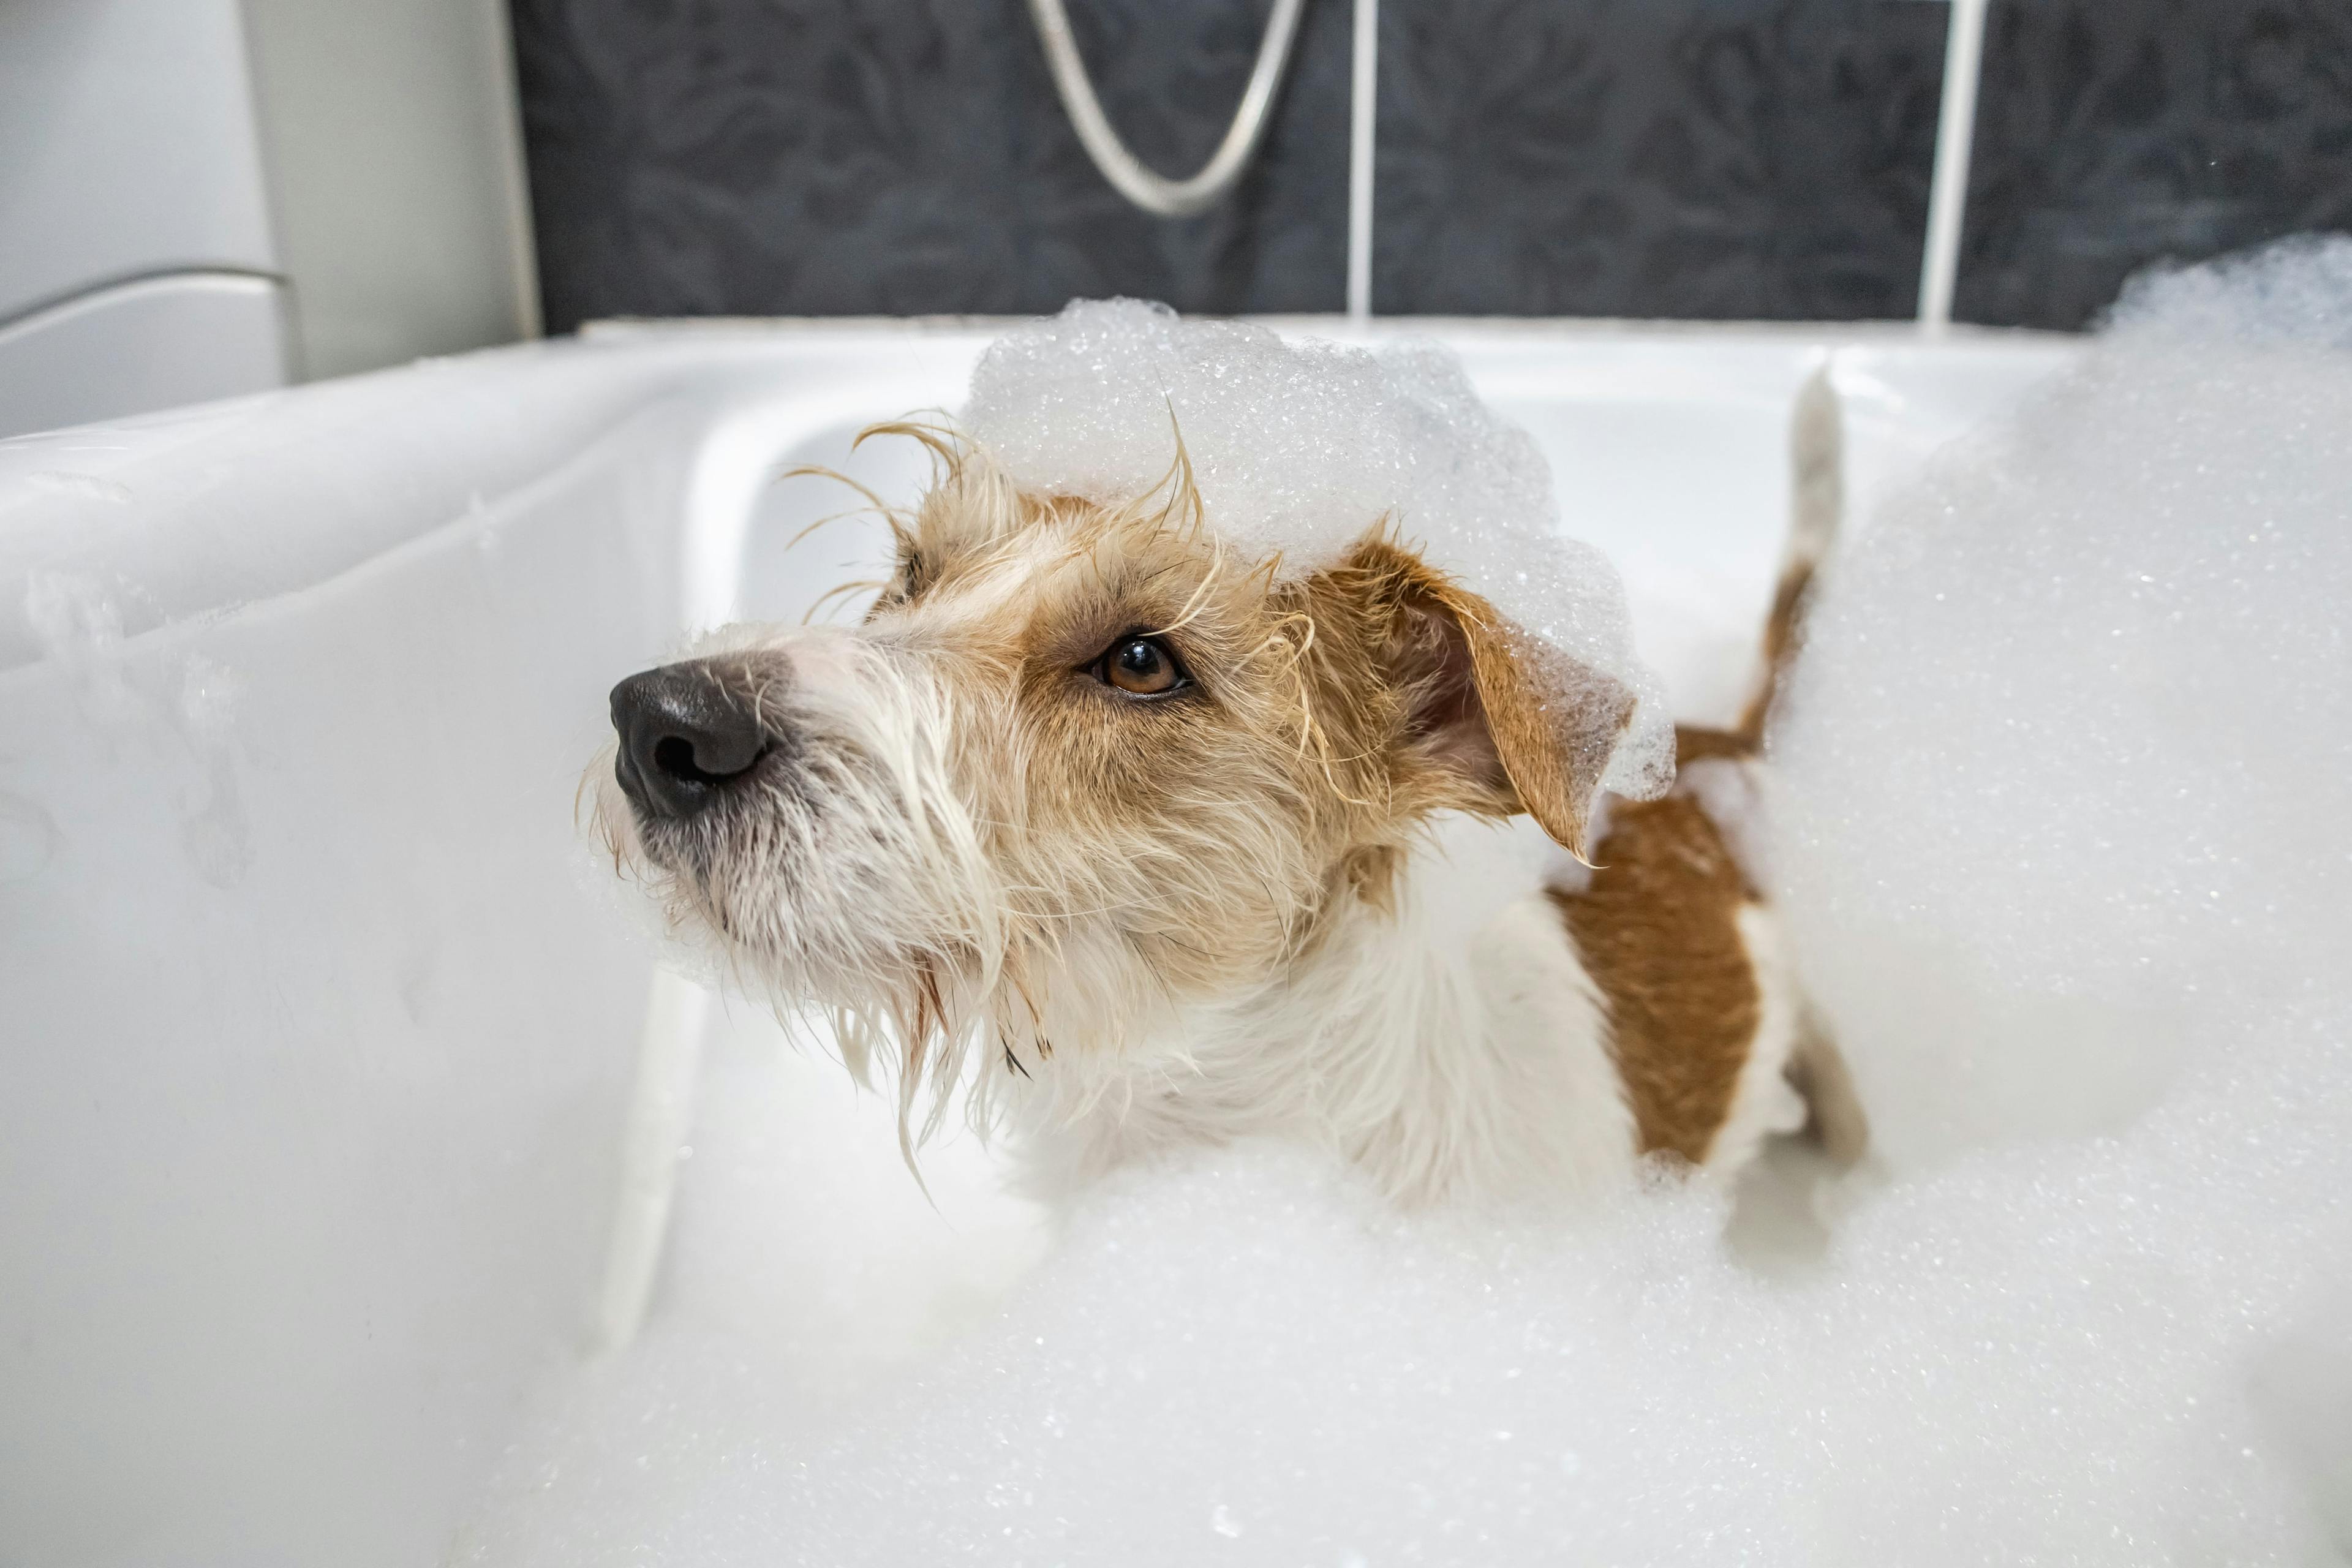 Grooming_Salon: A clean and modern grooming salon, fully equipped to pamper your pets